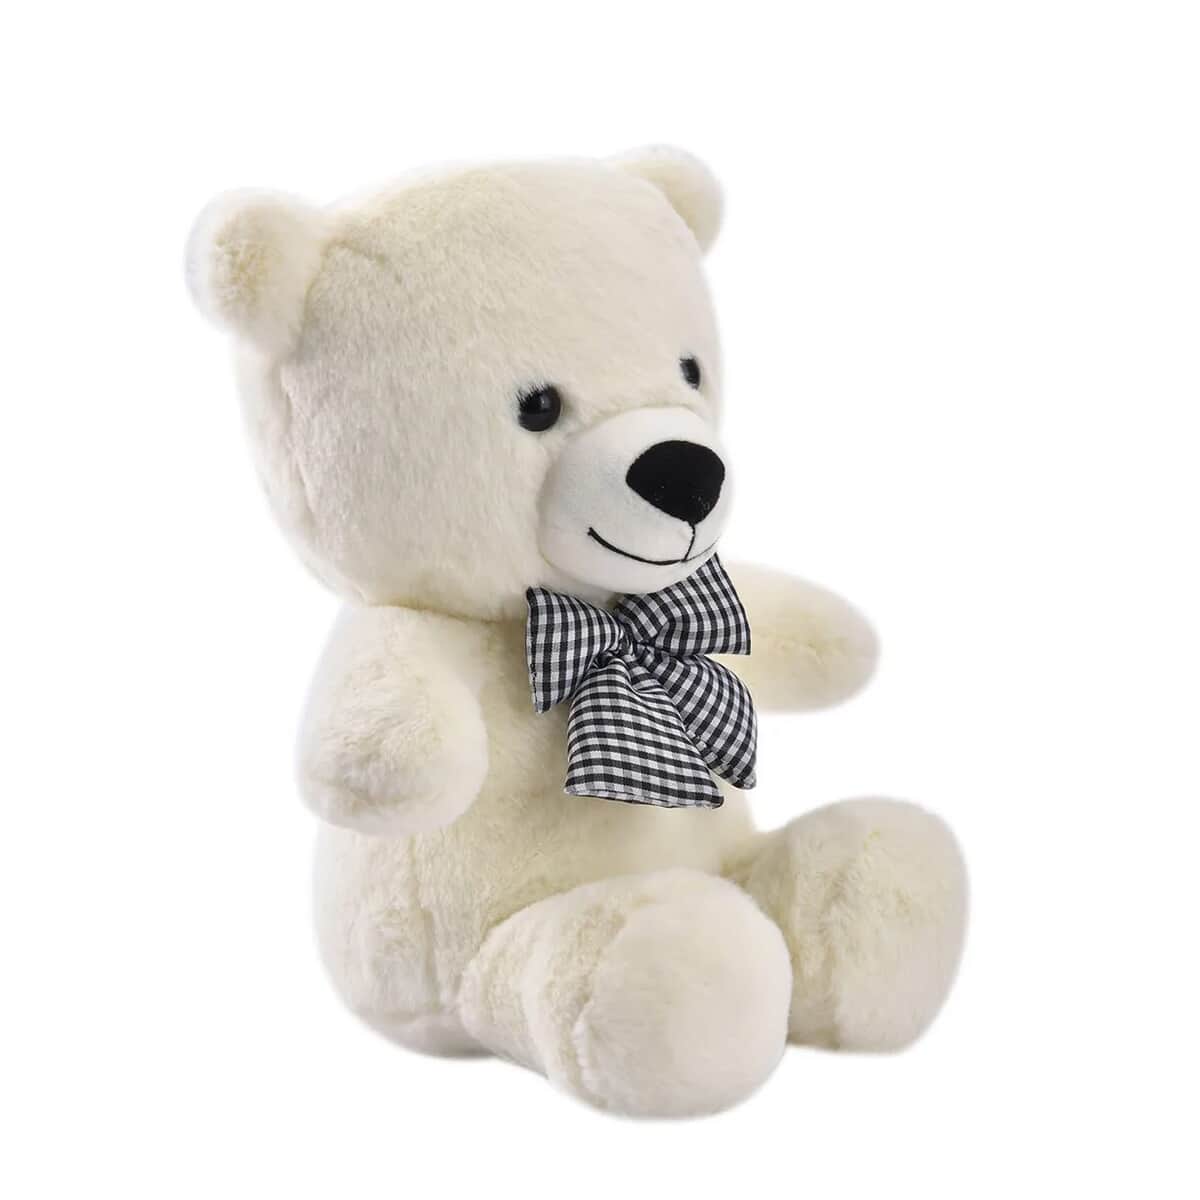 Off White Teddy Bear Toy with Zipper Bag (10 In) image number 3